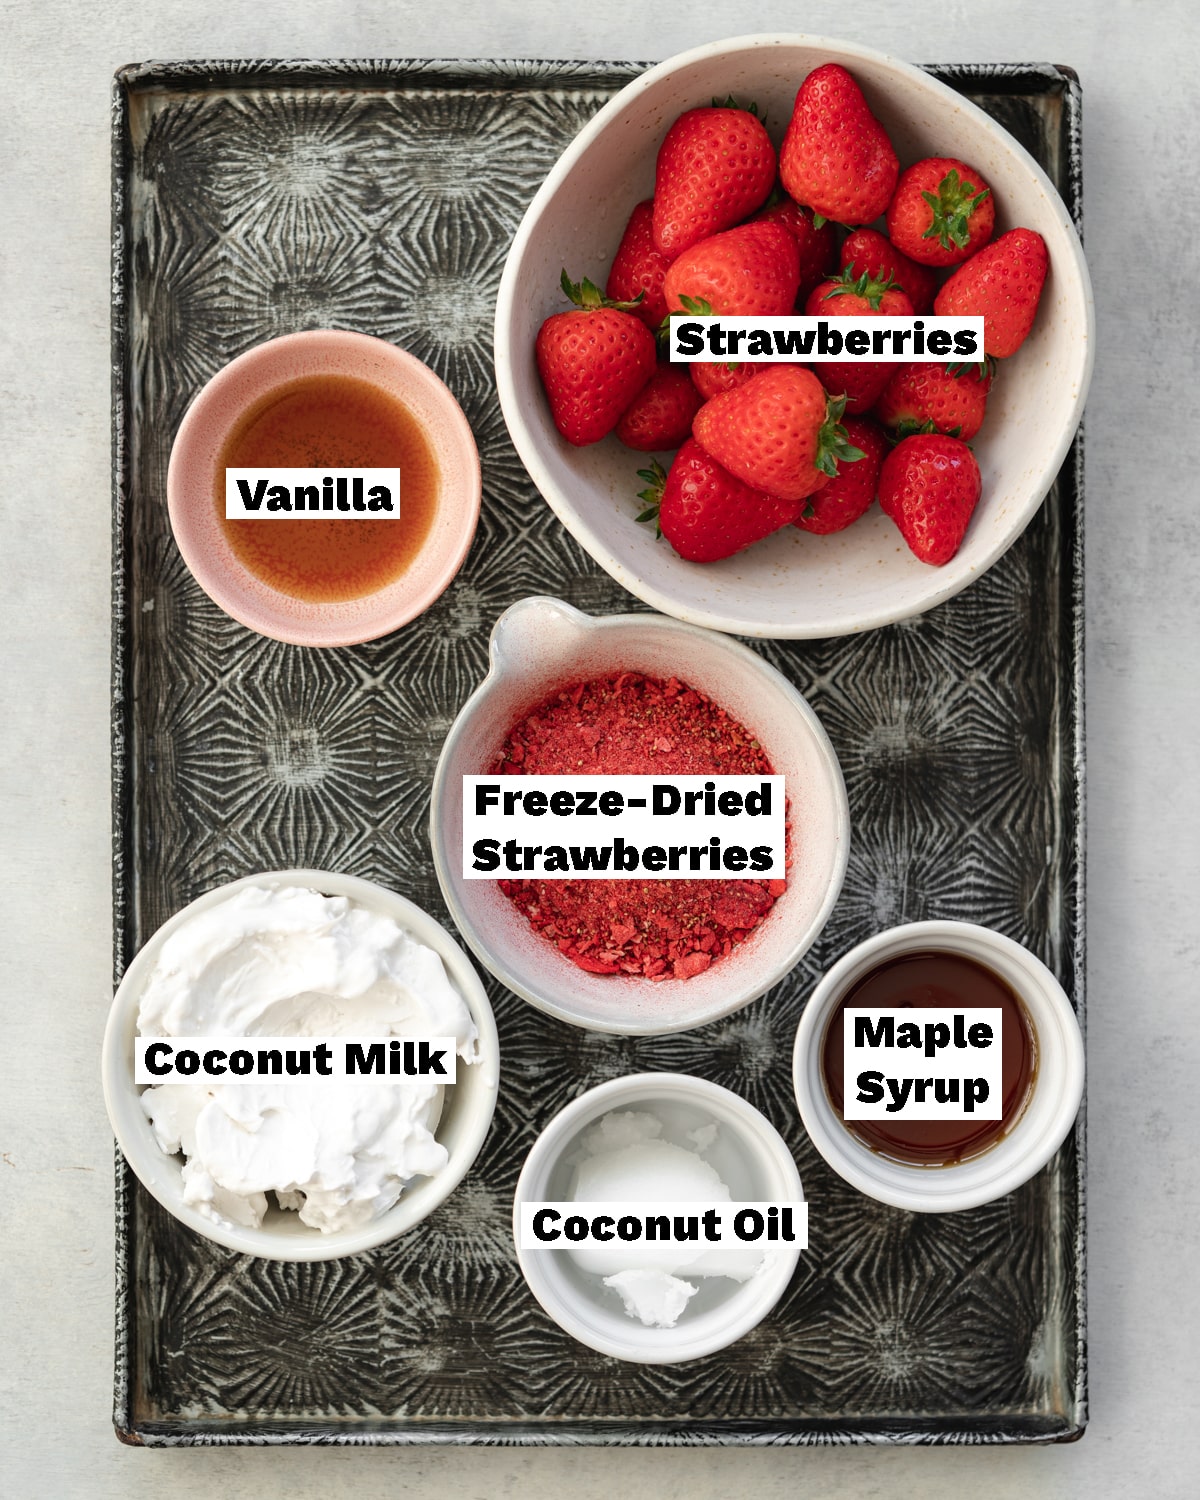 ingredients to make strawberry ice cream bars measured out on a tray.